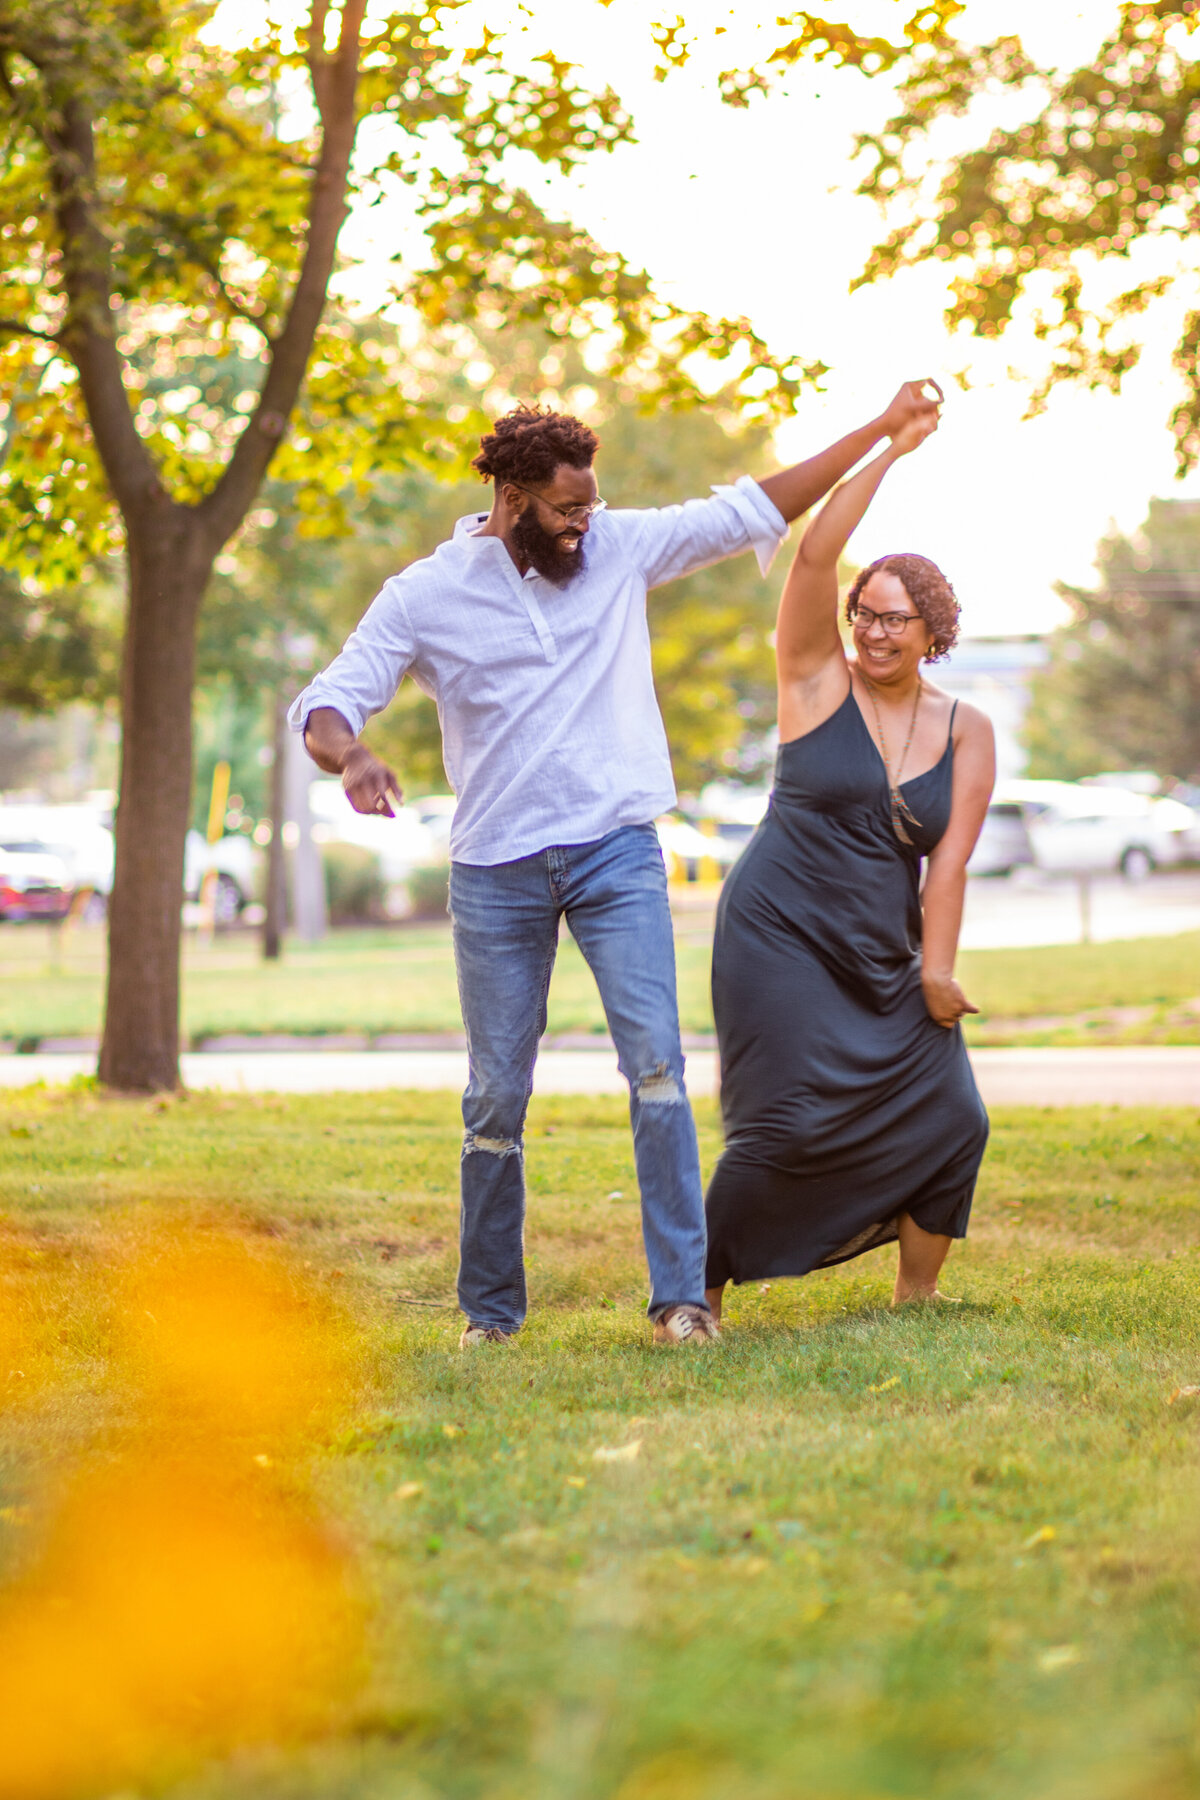 Dancing engagement photo. Photo by Devin Ramon Photography.